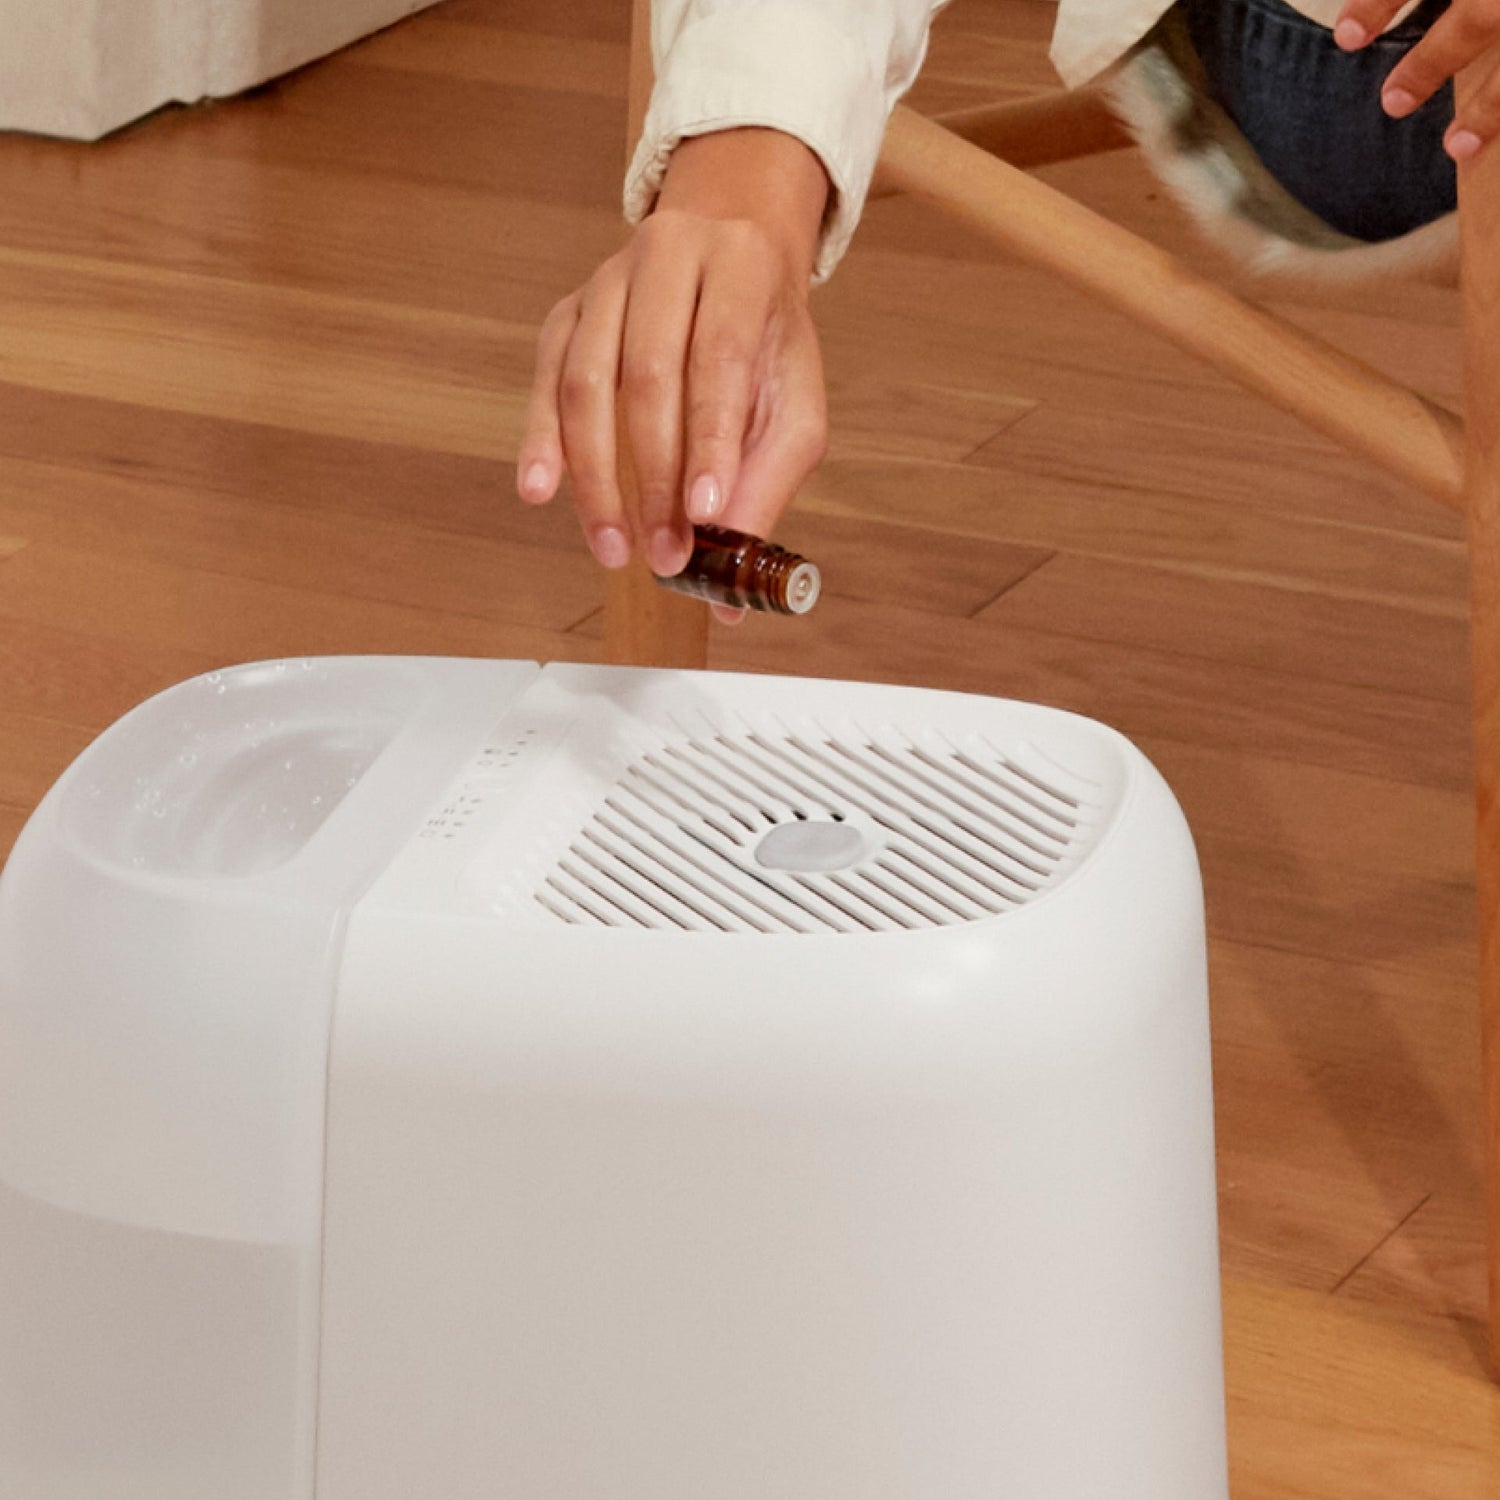 Humidifier Plus | Lifestyle, Woman dripping Canopy Aroma onto Humidifier Plus Aroma Puck